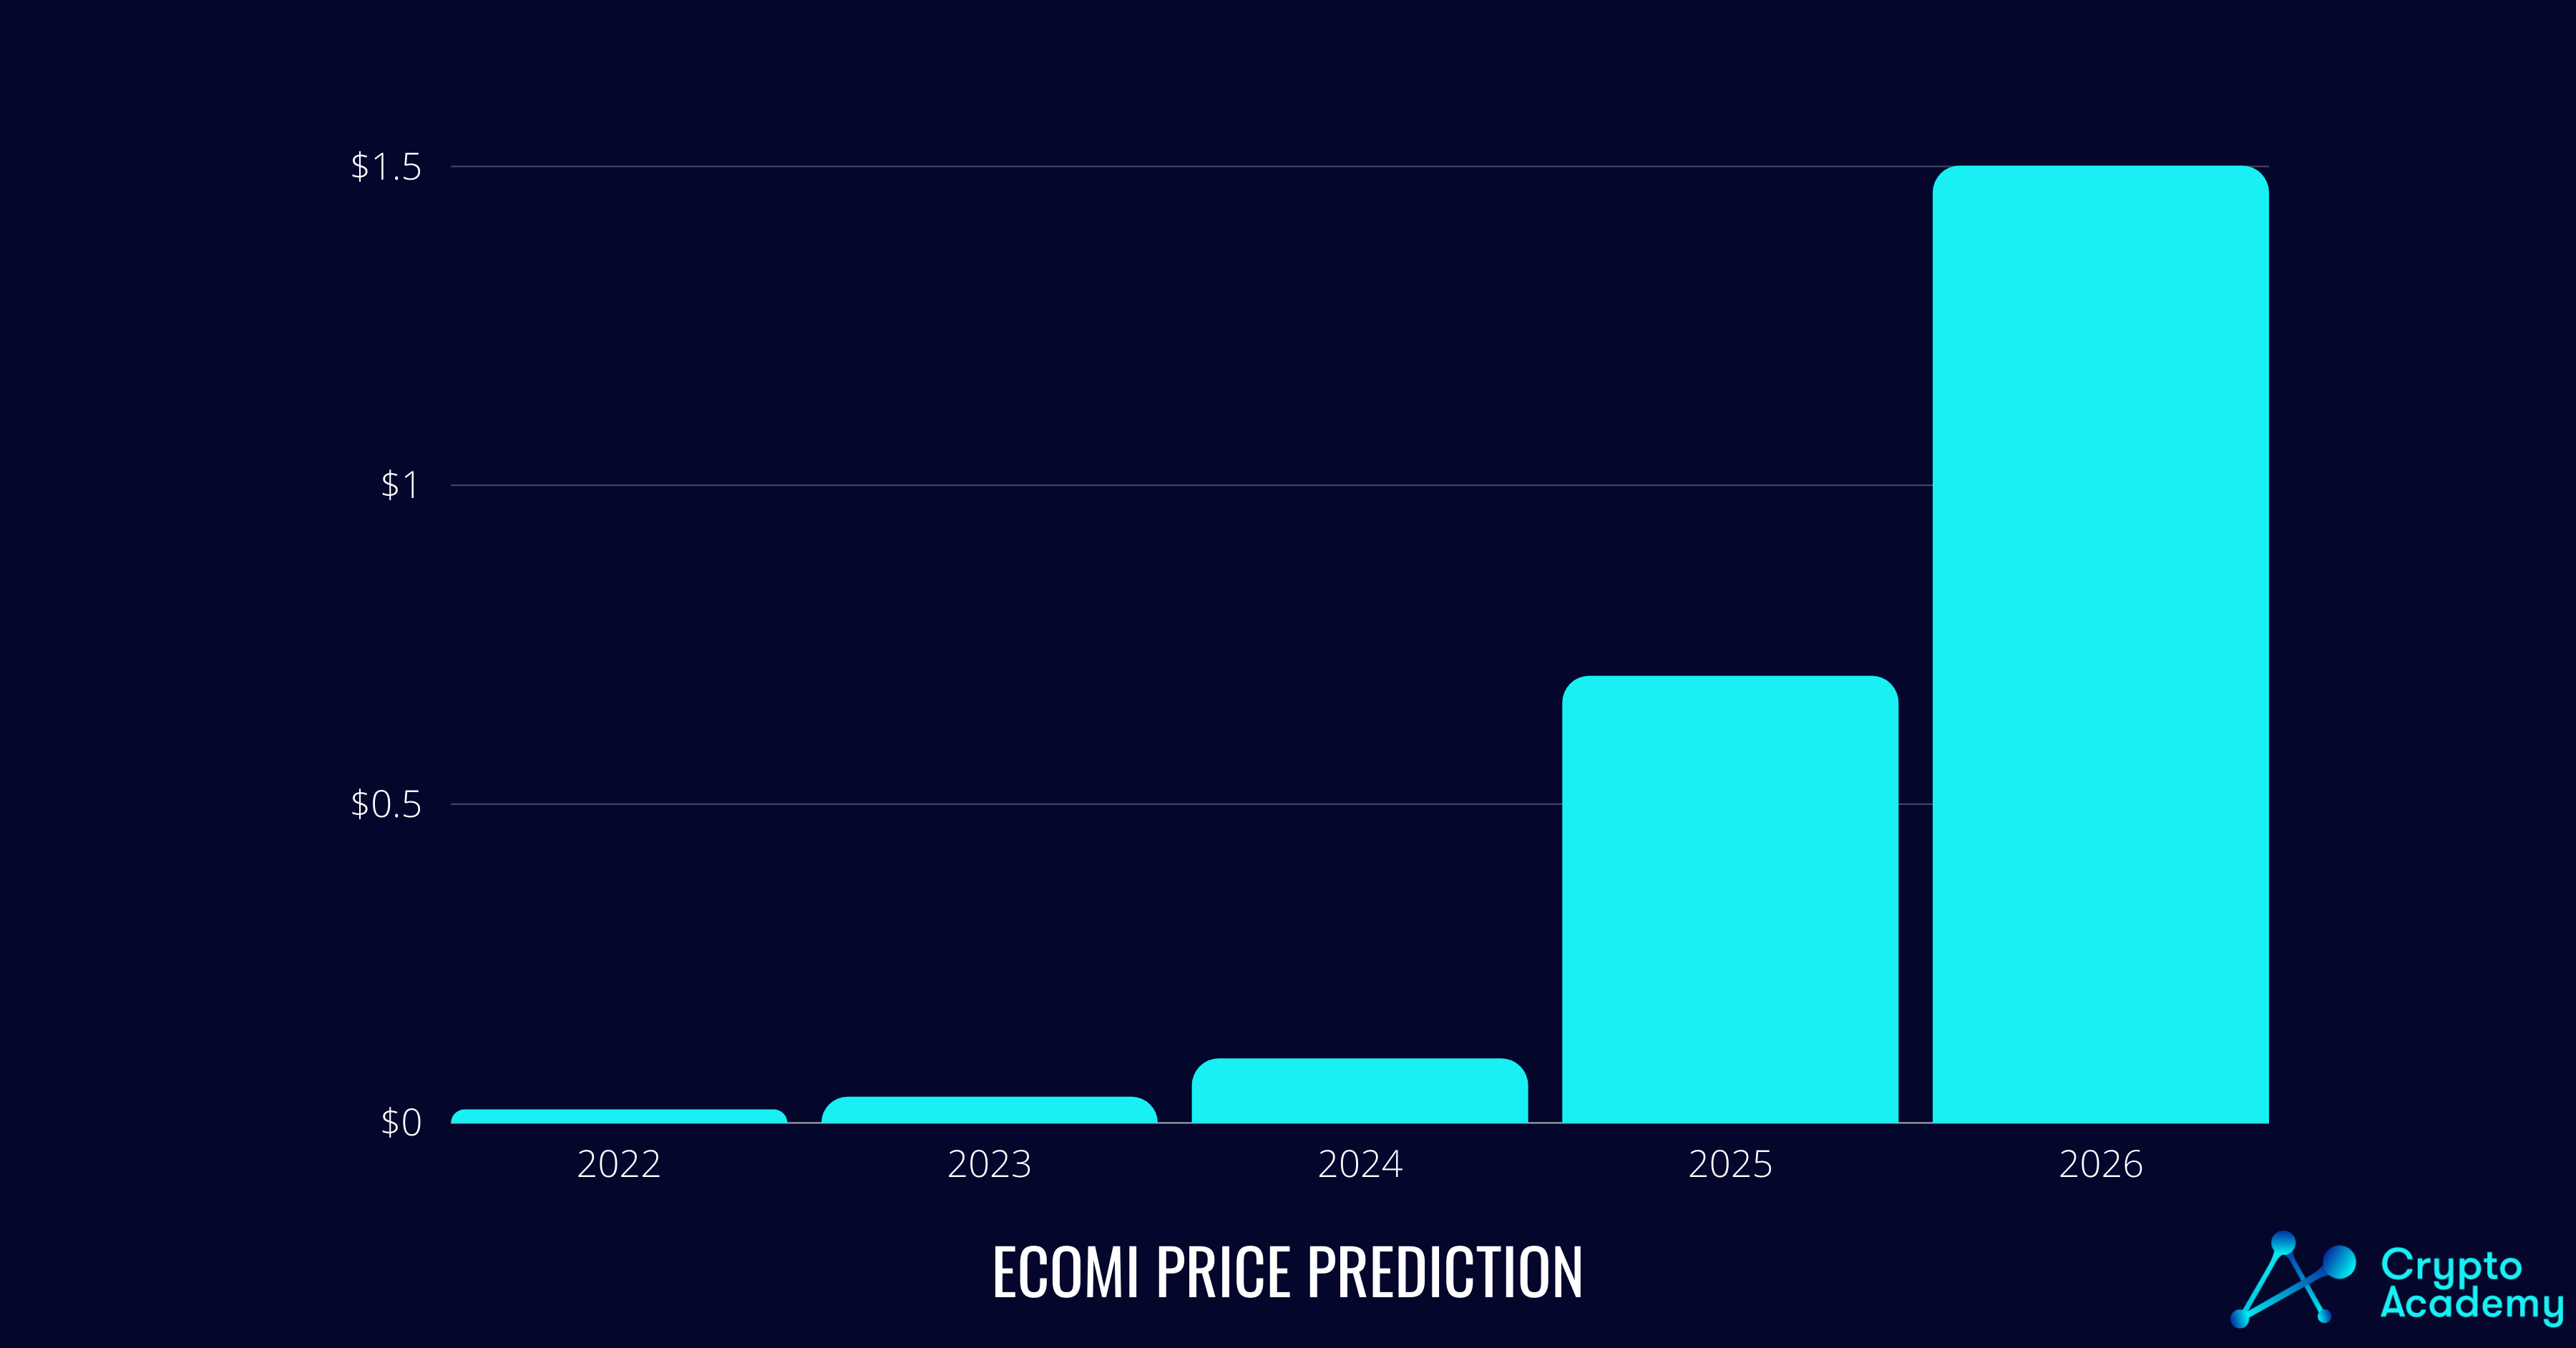 ECOMI (OMI) price prediction for the next five years.